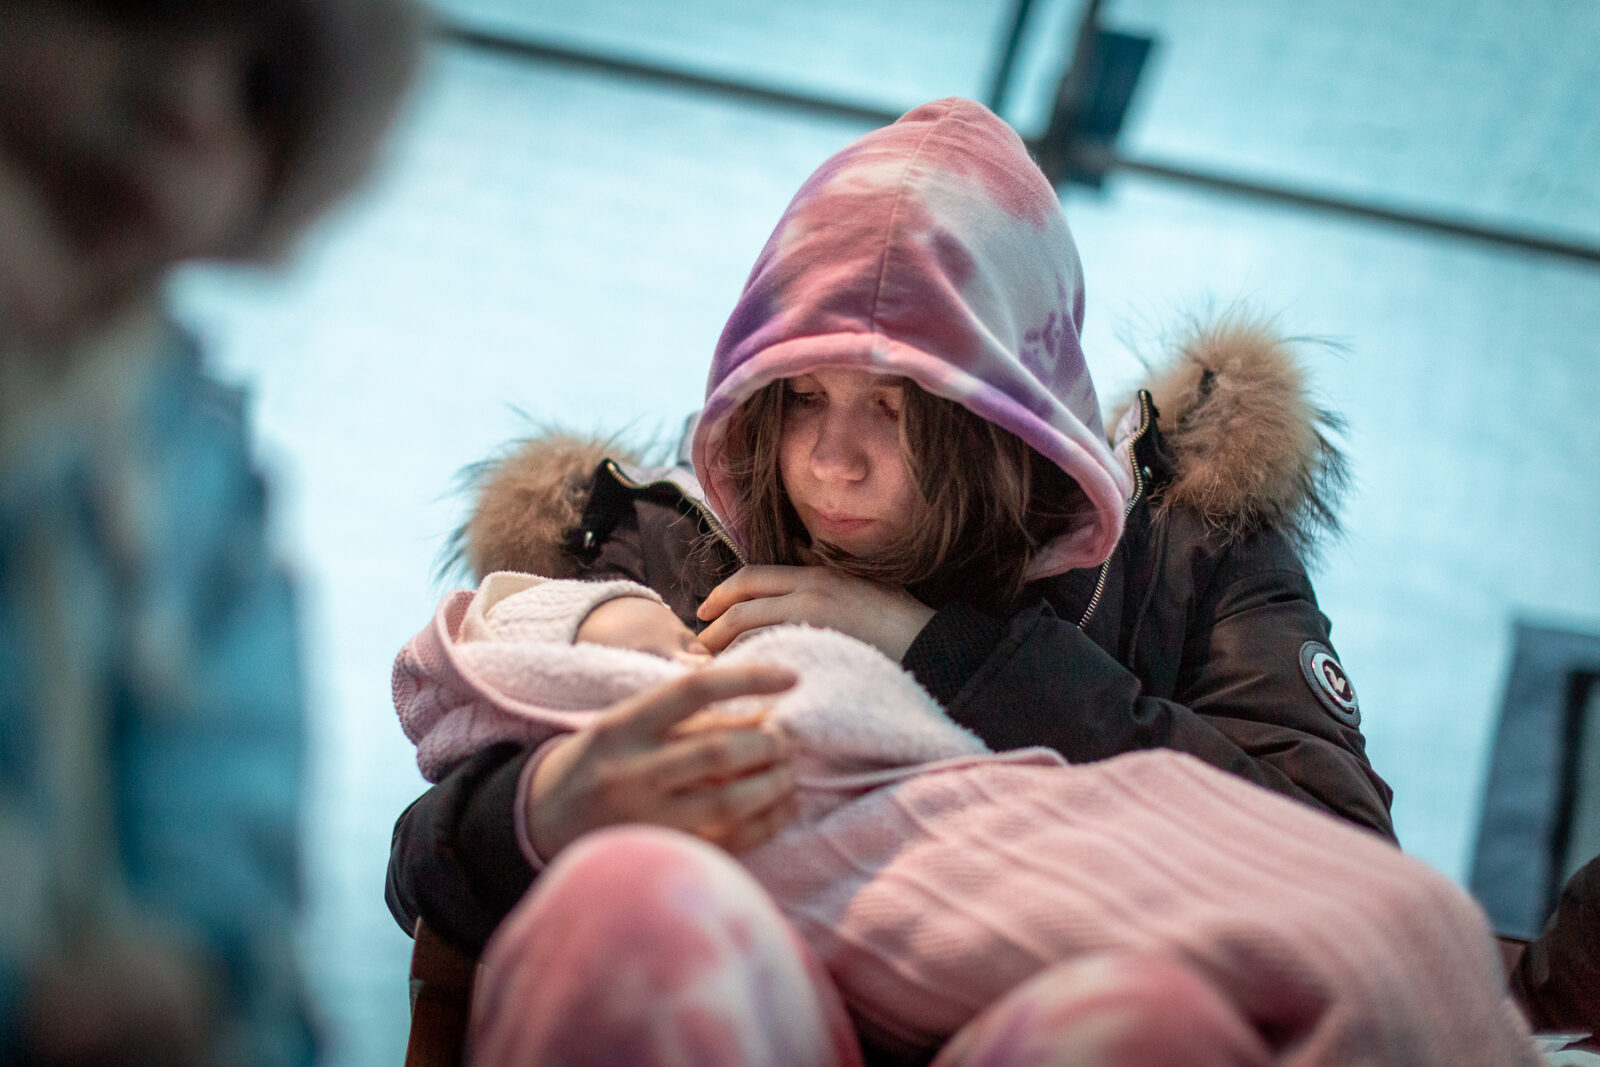 March 5: A woman cradles a baby in Lviv, amid a throng of people waiting to get out of the country.